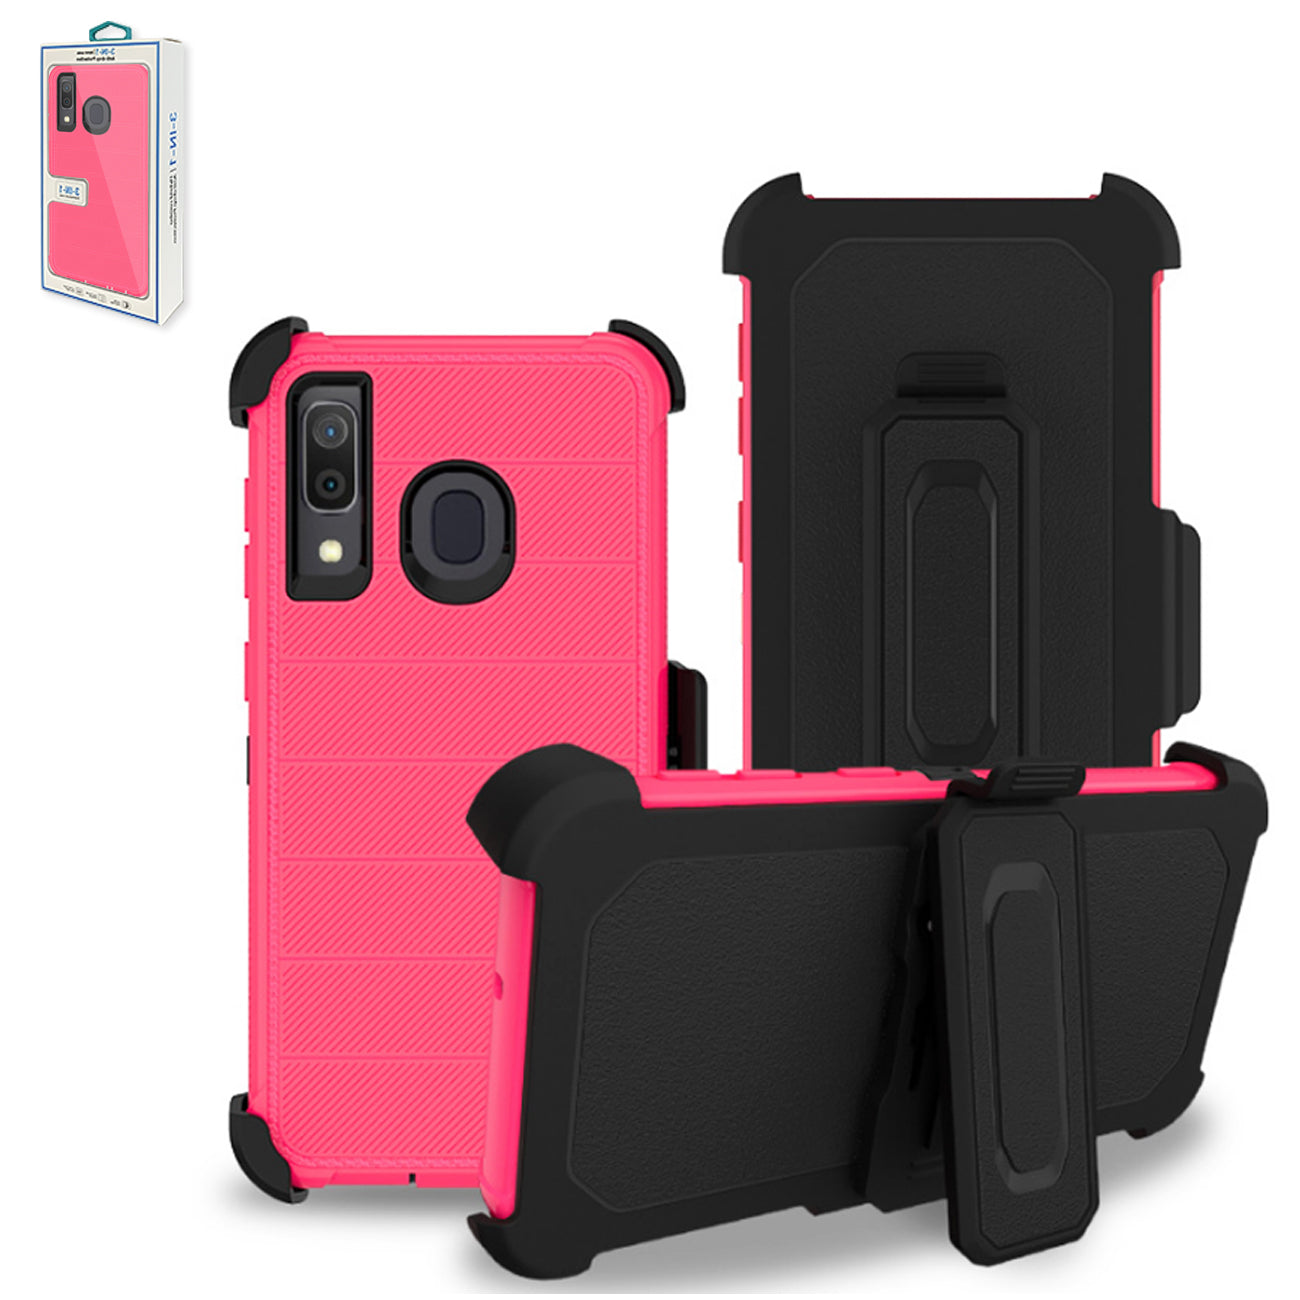 Case Holster Combo Hybrid 3-In-1 Heavy Duty Hot Pink Color